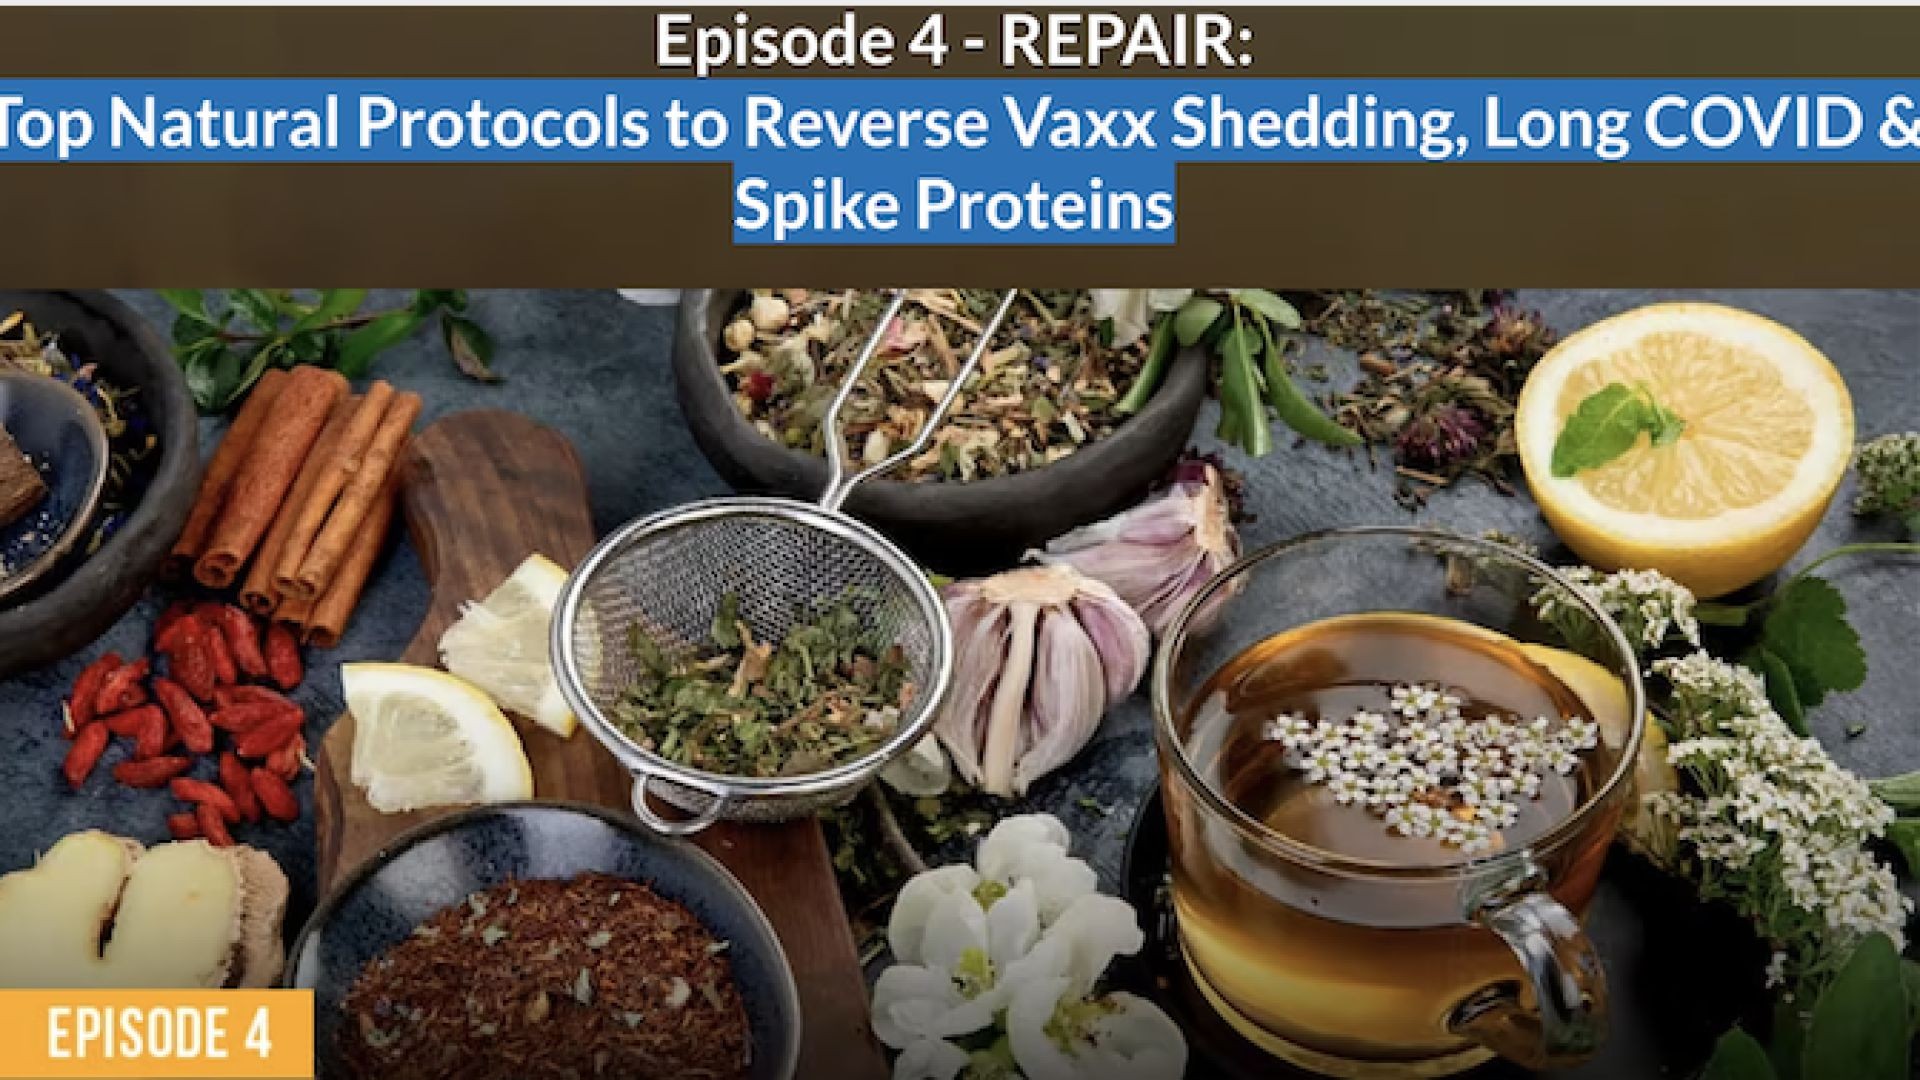 "Top Natural Protocols to Reverse Vaxx Shedding, Long COVID & Spike Proteins"